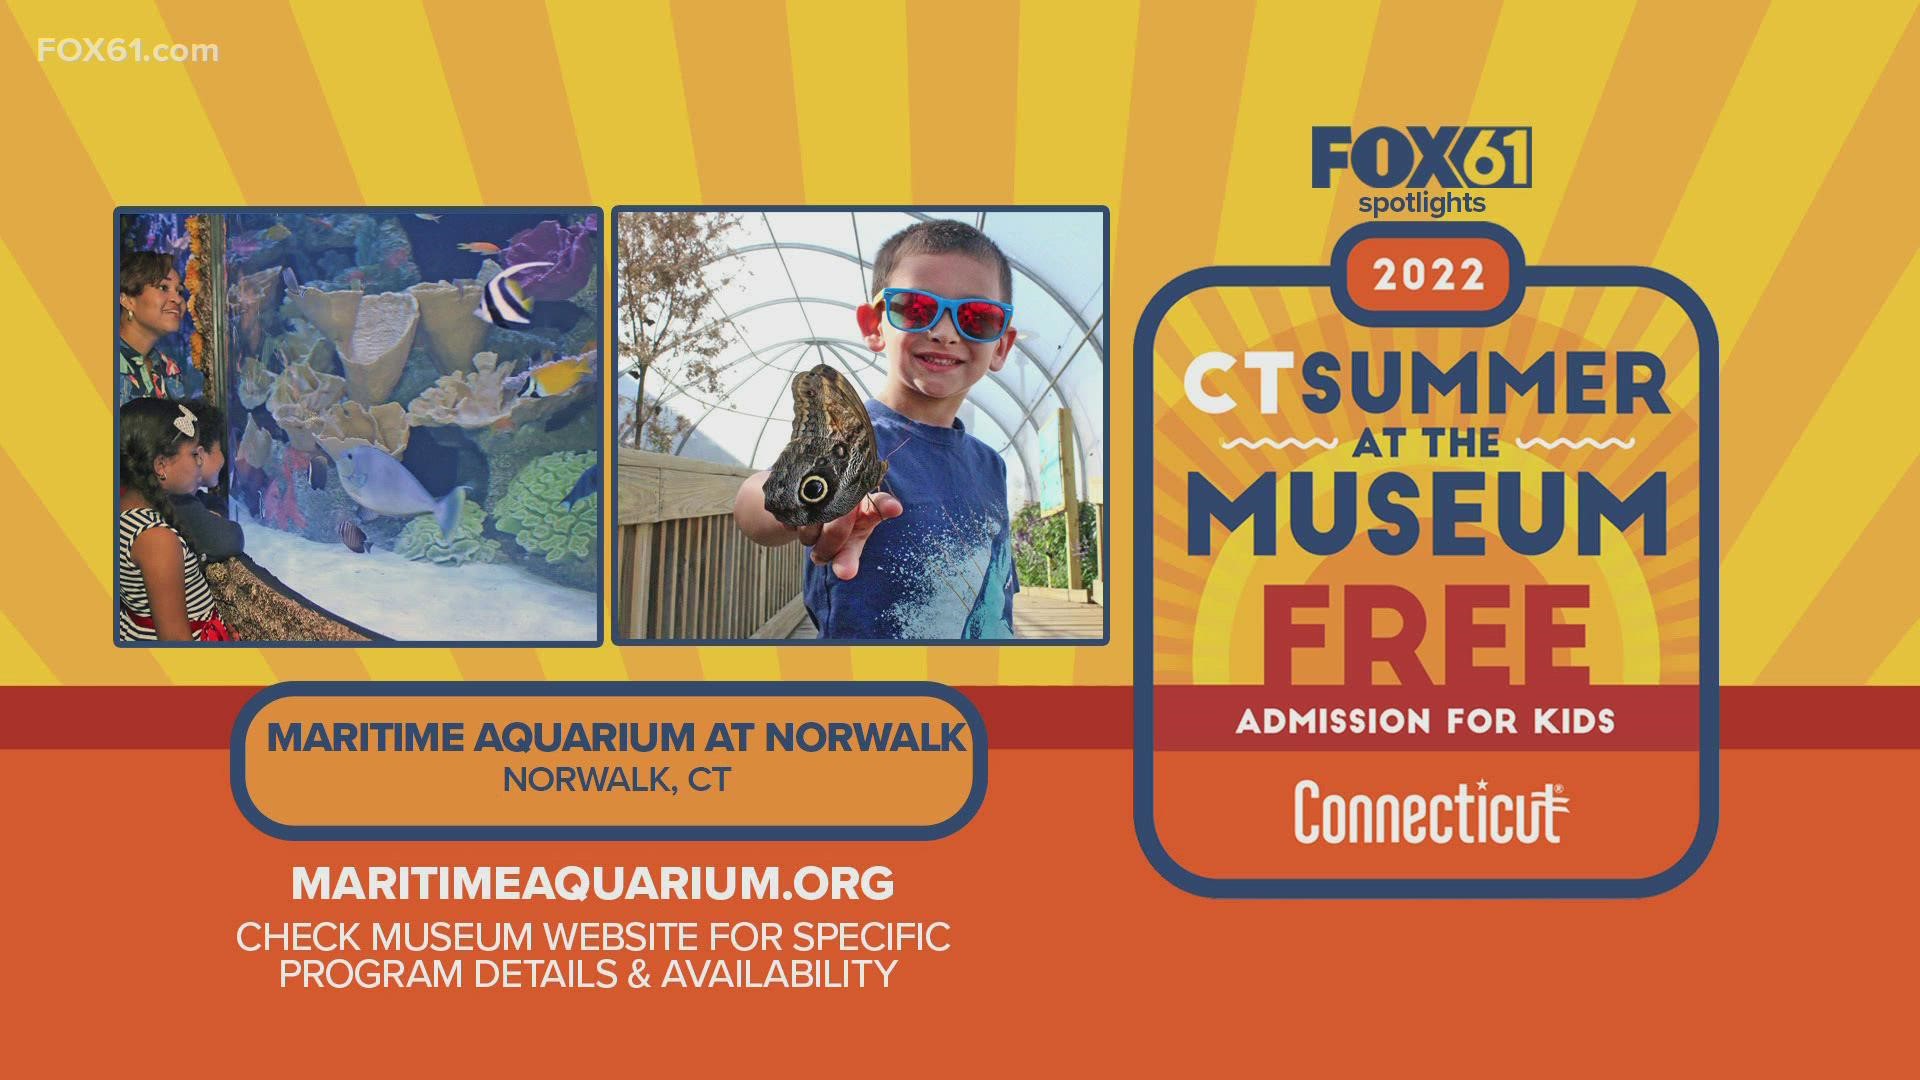 Kids 18 and under can visit the Maritime Aquarium in Norwalk for free with an adult who is a resident of Connecticut. It runs through Sept. 5.